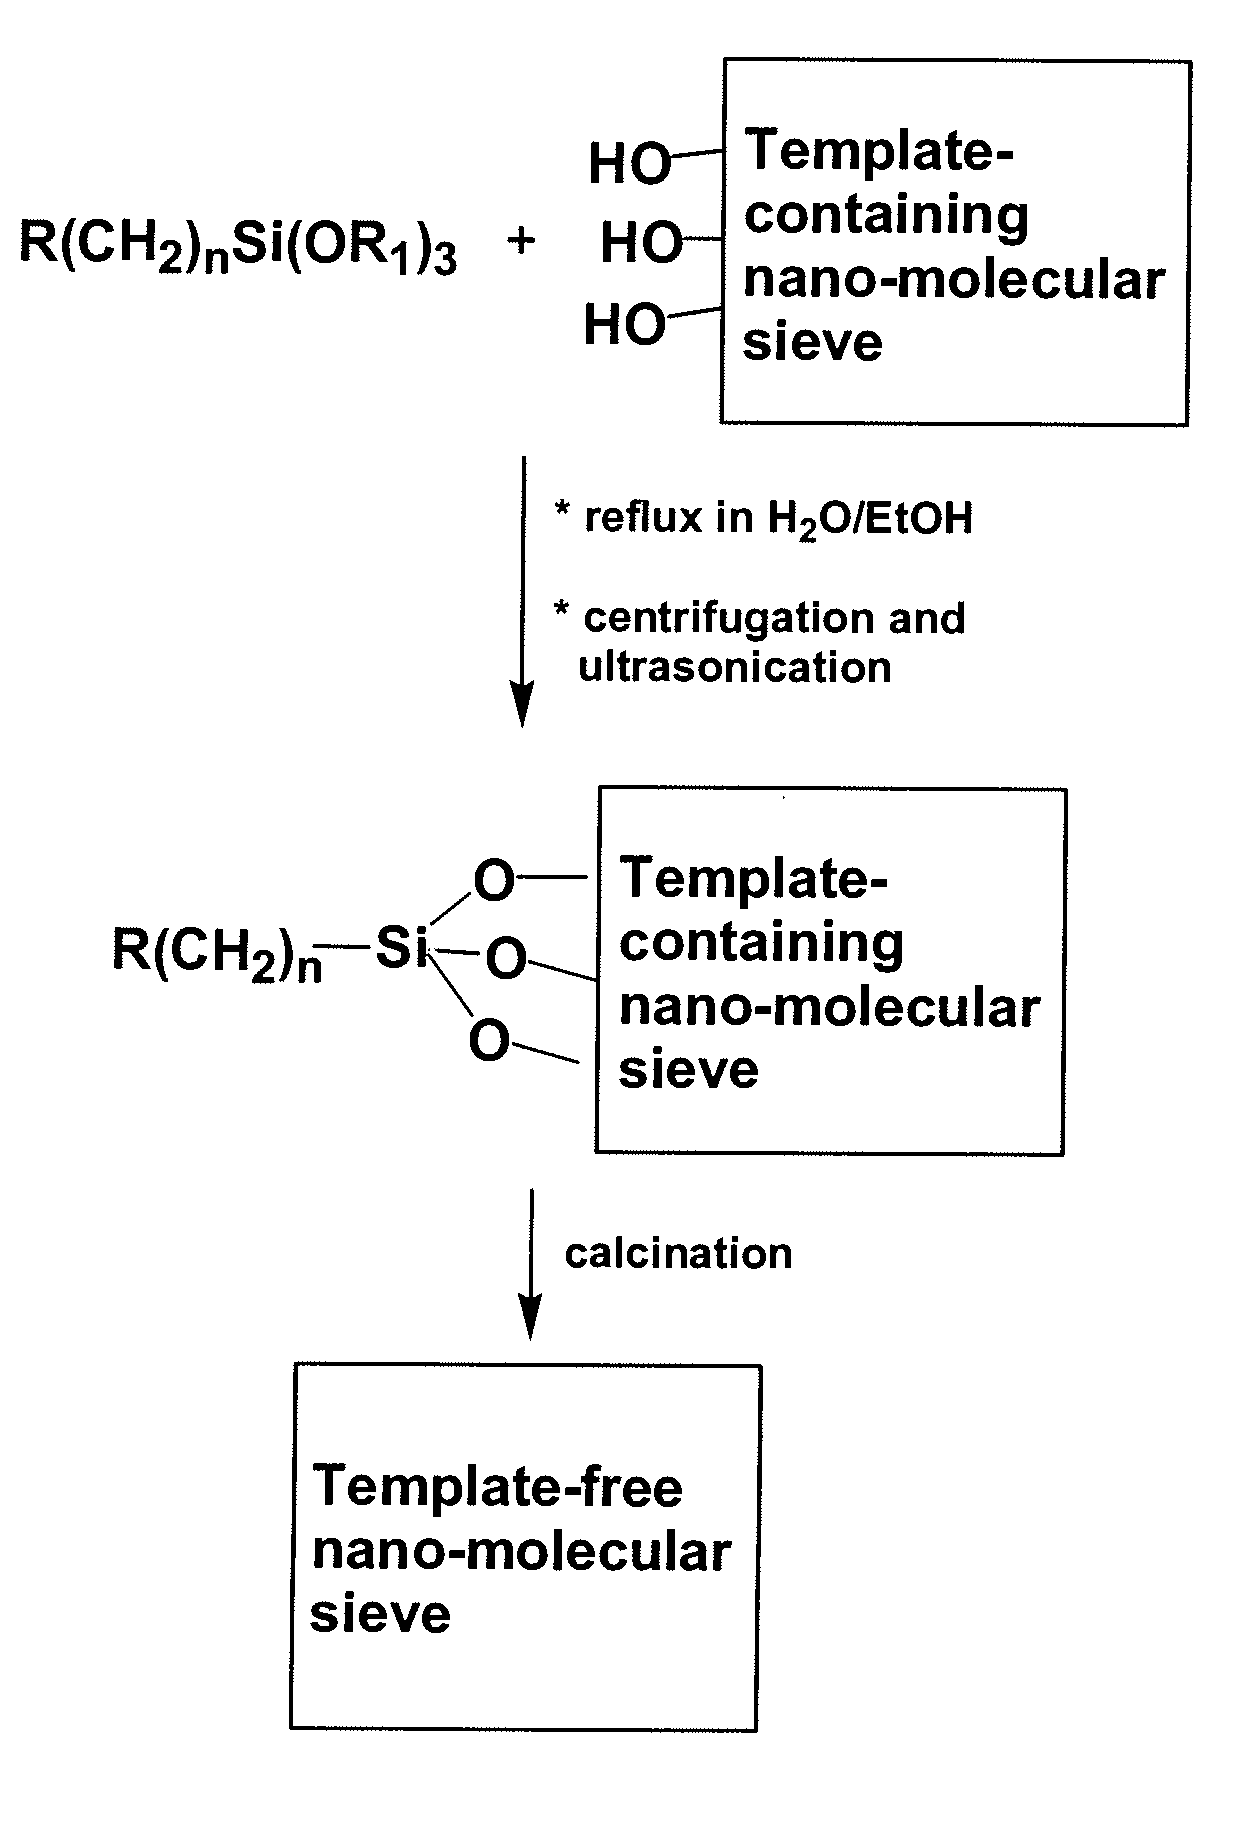 Nano-molecular sieve-polymer mixed matrix membranes with significantly improved gas separation performance